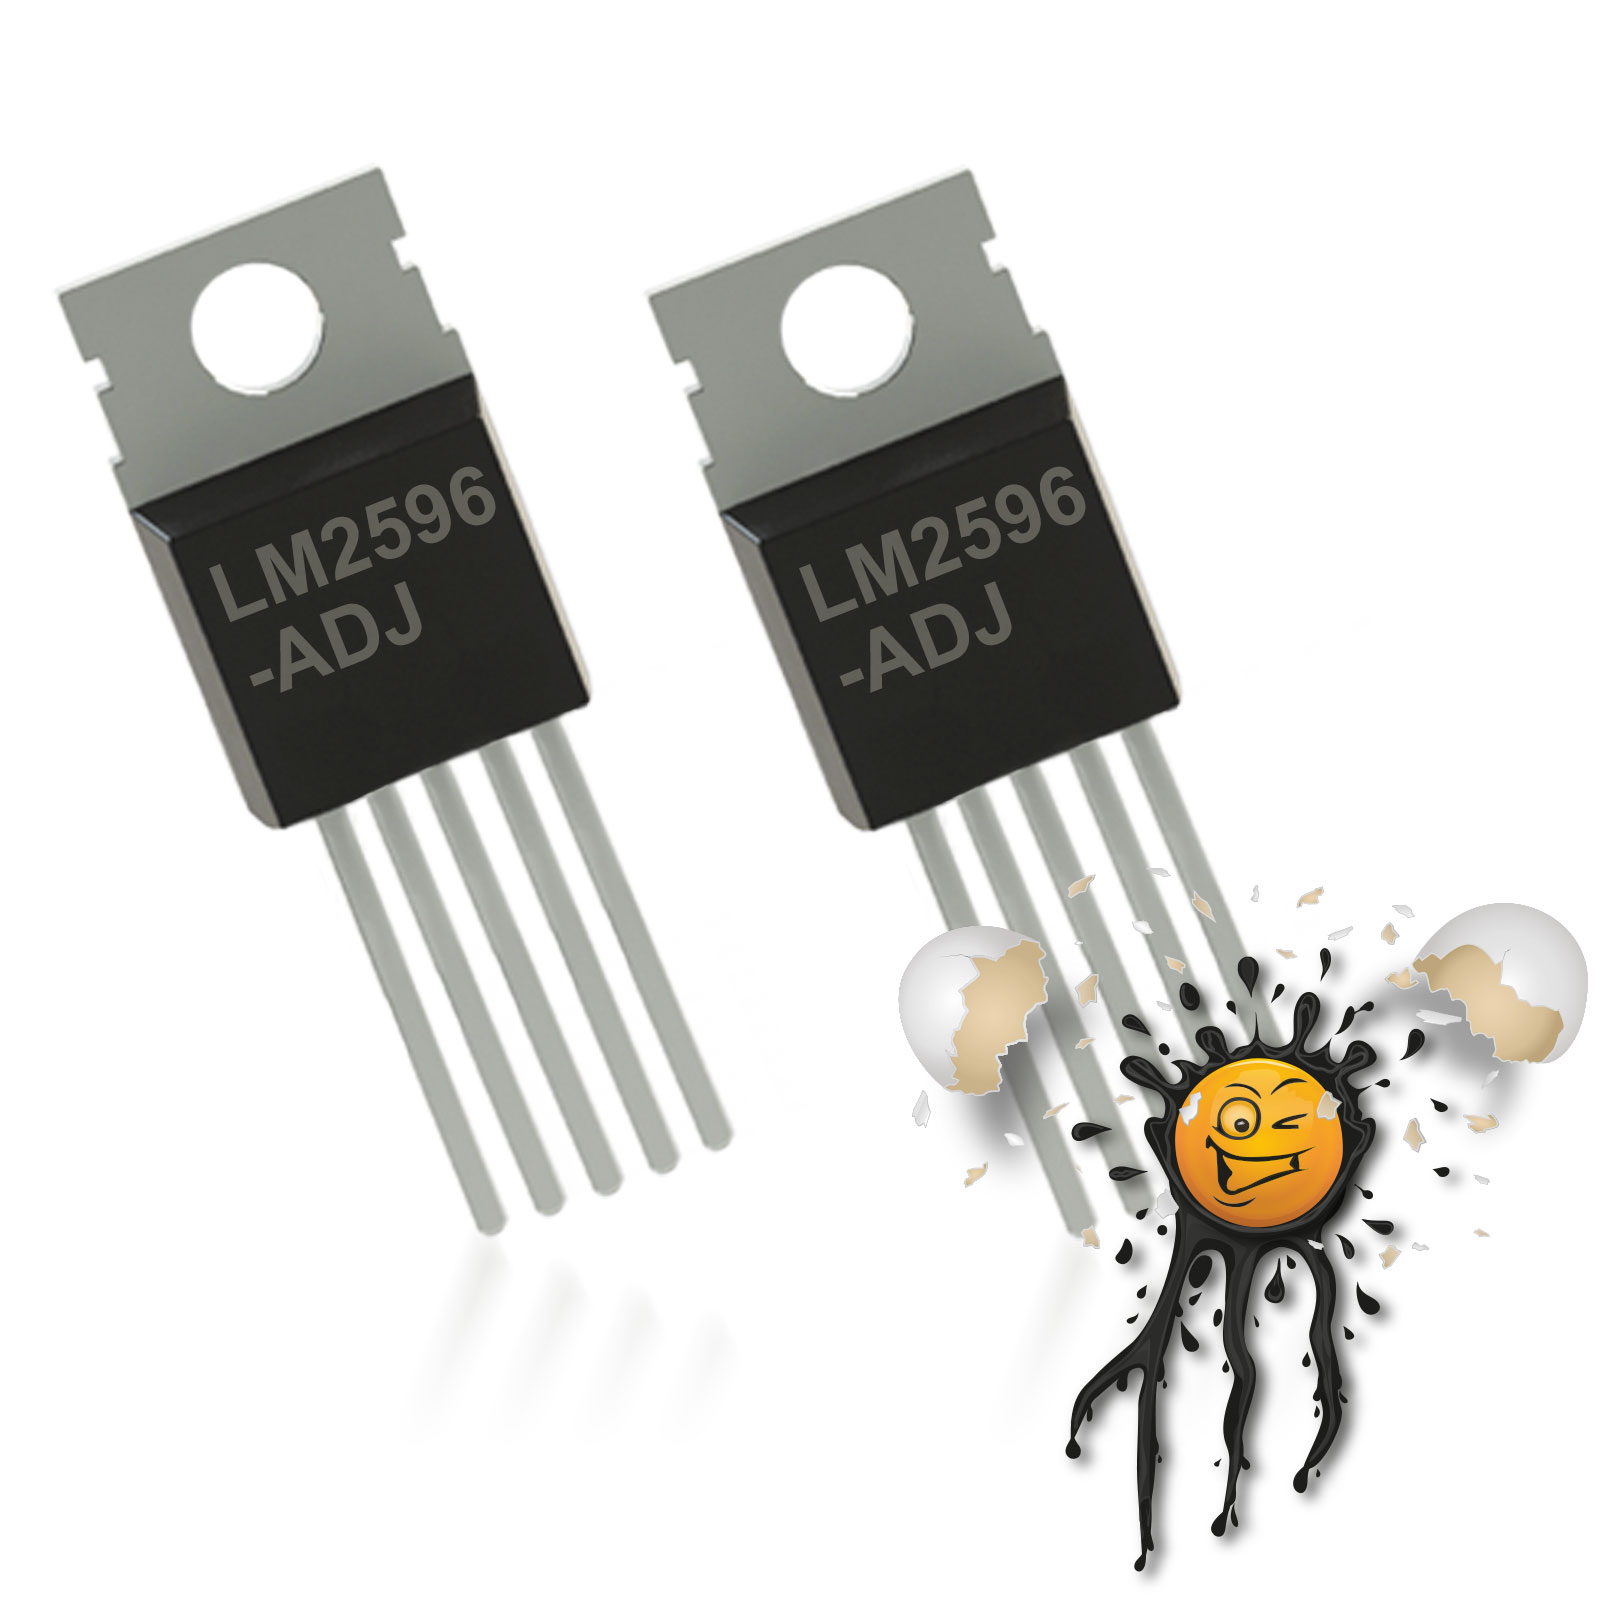 2 Stück TO-220 Spannungsregler LM2596 variabel – IoT powered by